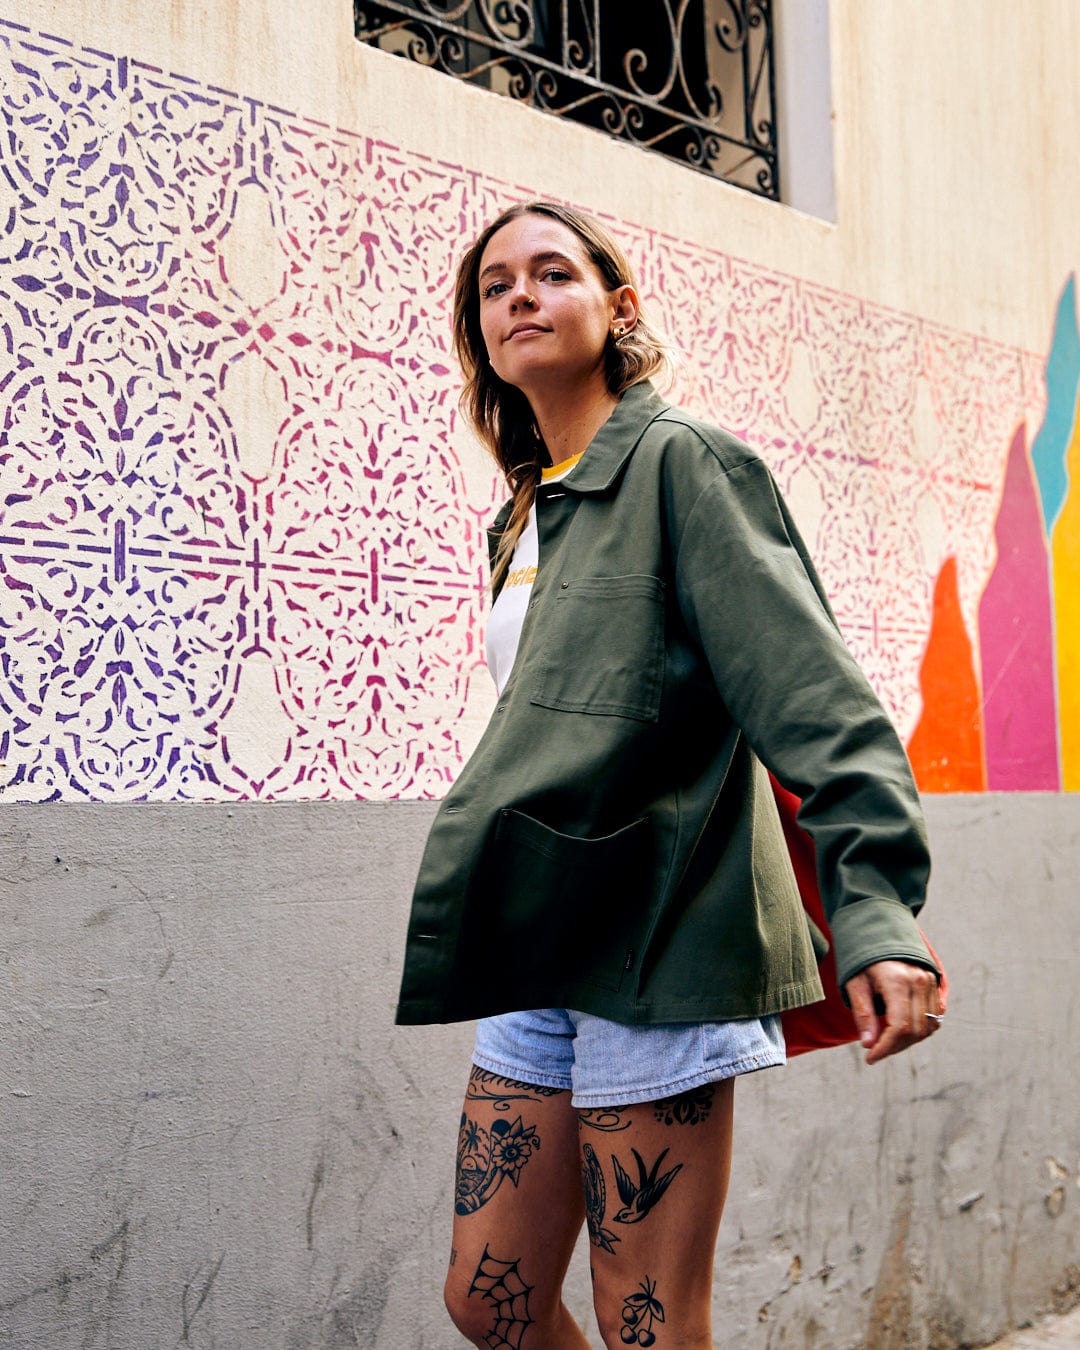 A woman in a Saltrock Barden - Womens Lightweight Utility Jacket in Dark Green and denim shorts stands confidently in front of a colorful mural on an urban street.